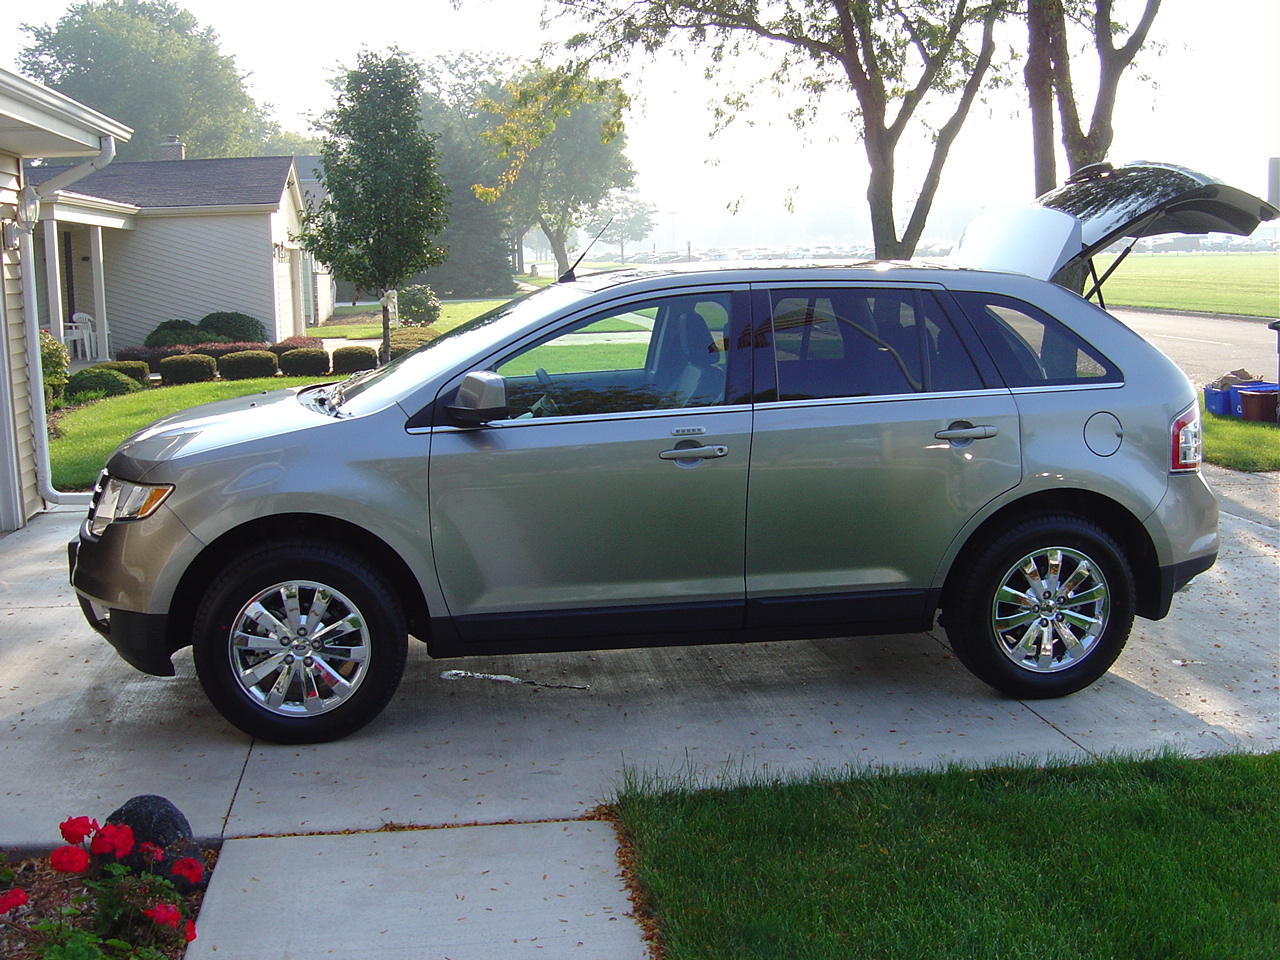 2007 Ford edge limited edition #3